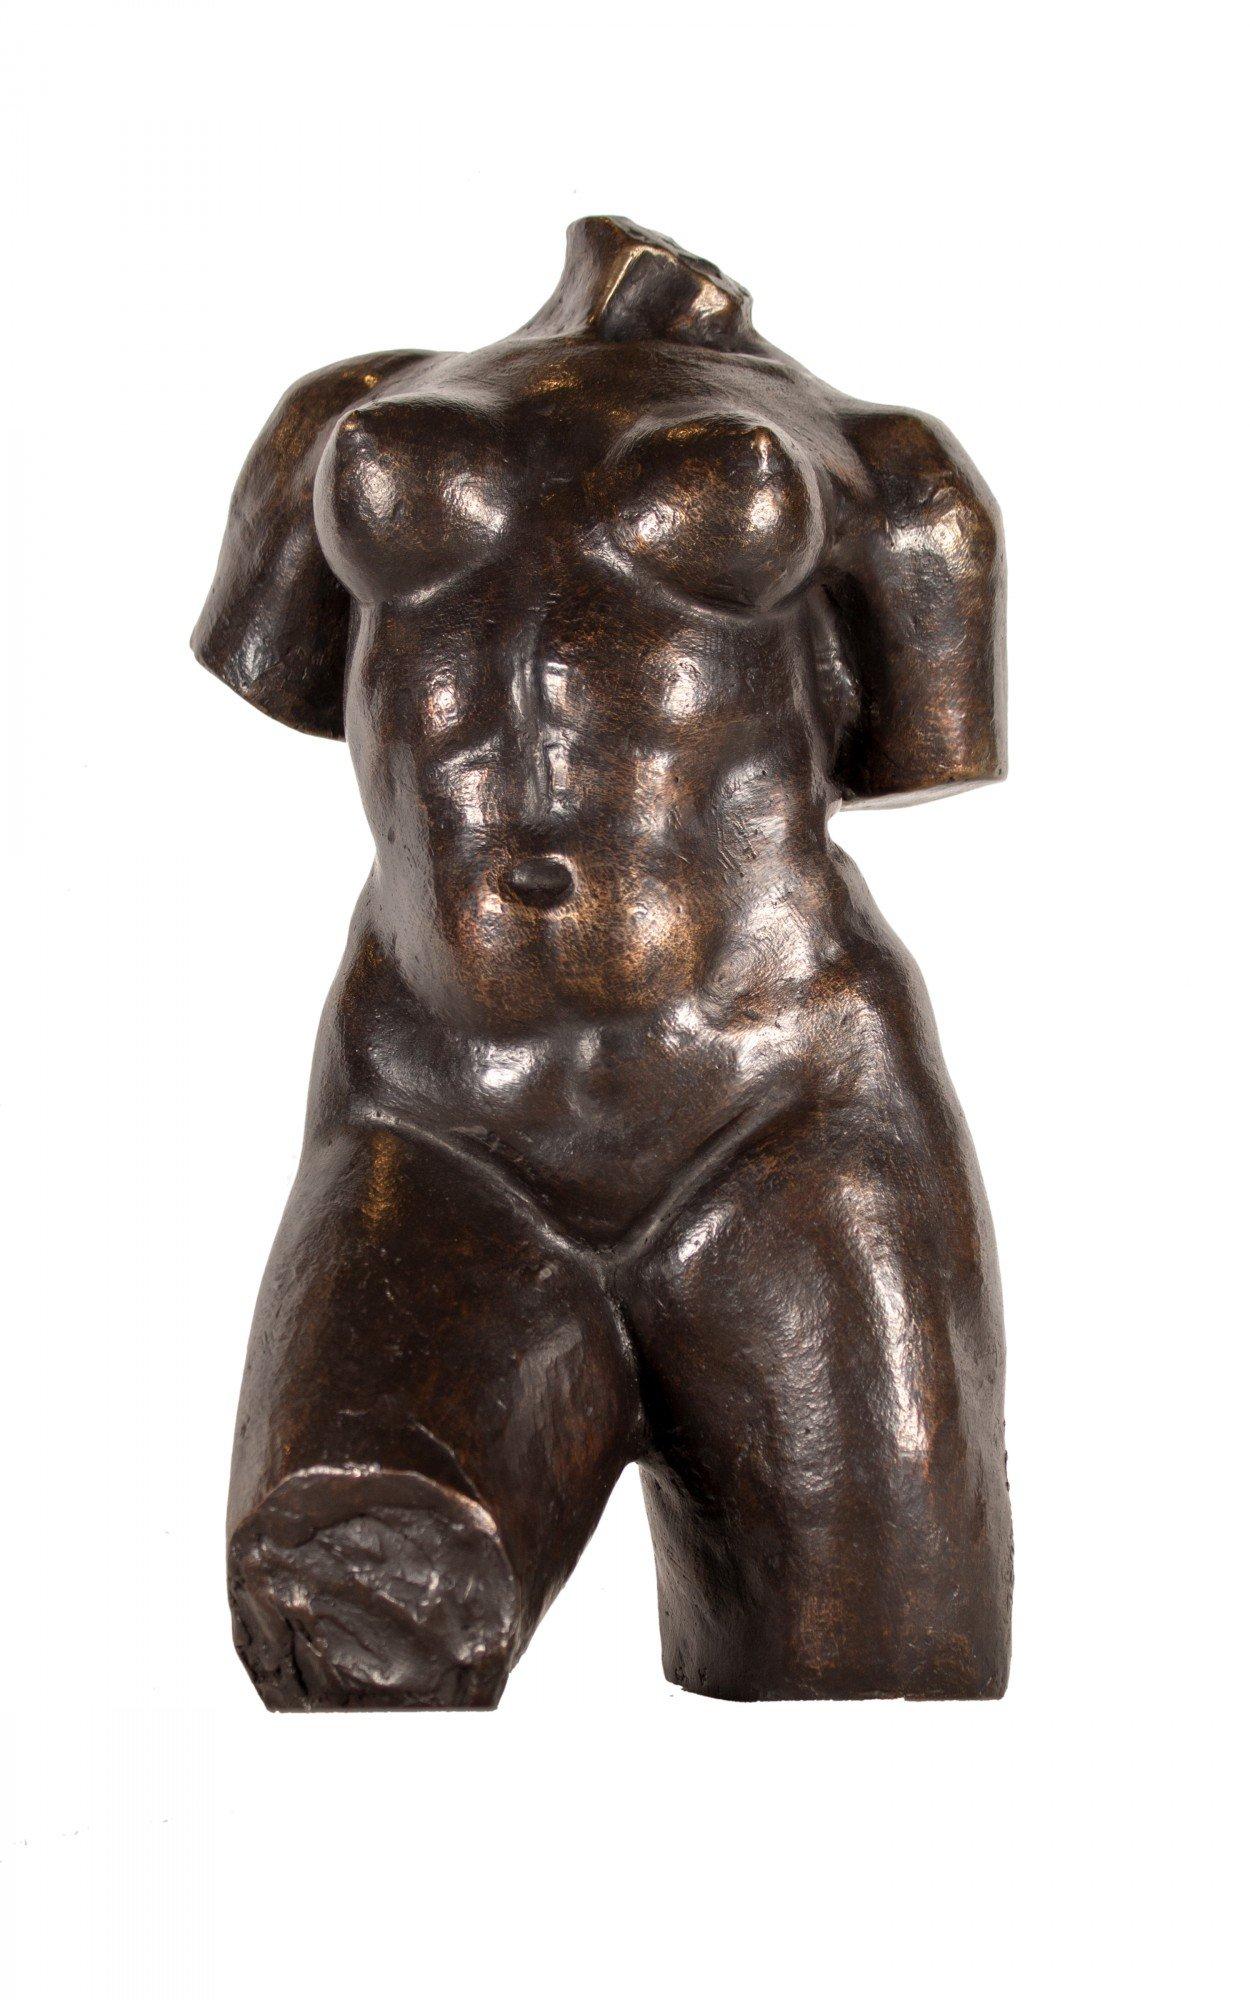 After Aristide Maillol (French, 1861–1944)
Bronze Torso
Signed with foundry mark Cire Perdue A. A. Hebrard
12 in. h. x 6 in. w. x 6 in. d.

Foundry mark "Cire Perdue A. A. Hebrard". The Hébrard foundry was created by the art founder Adrien-Aurélien